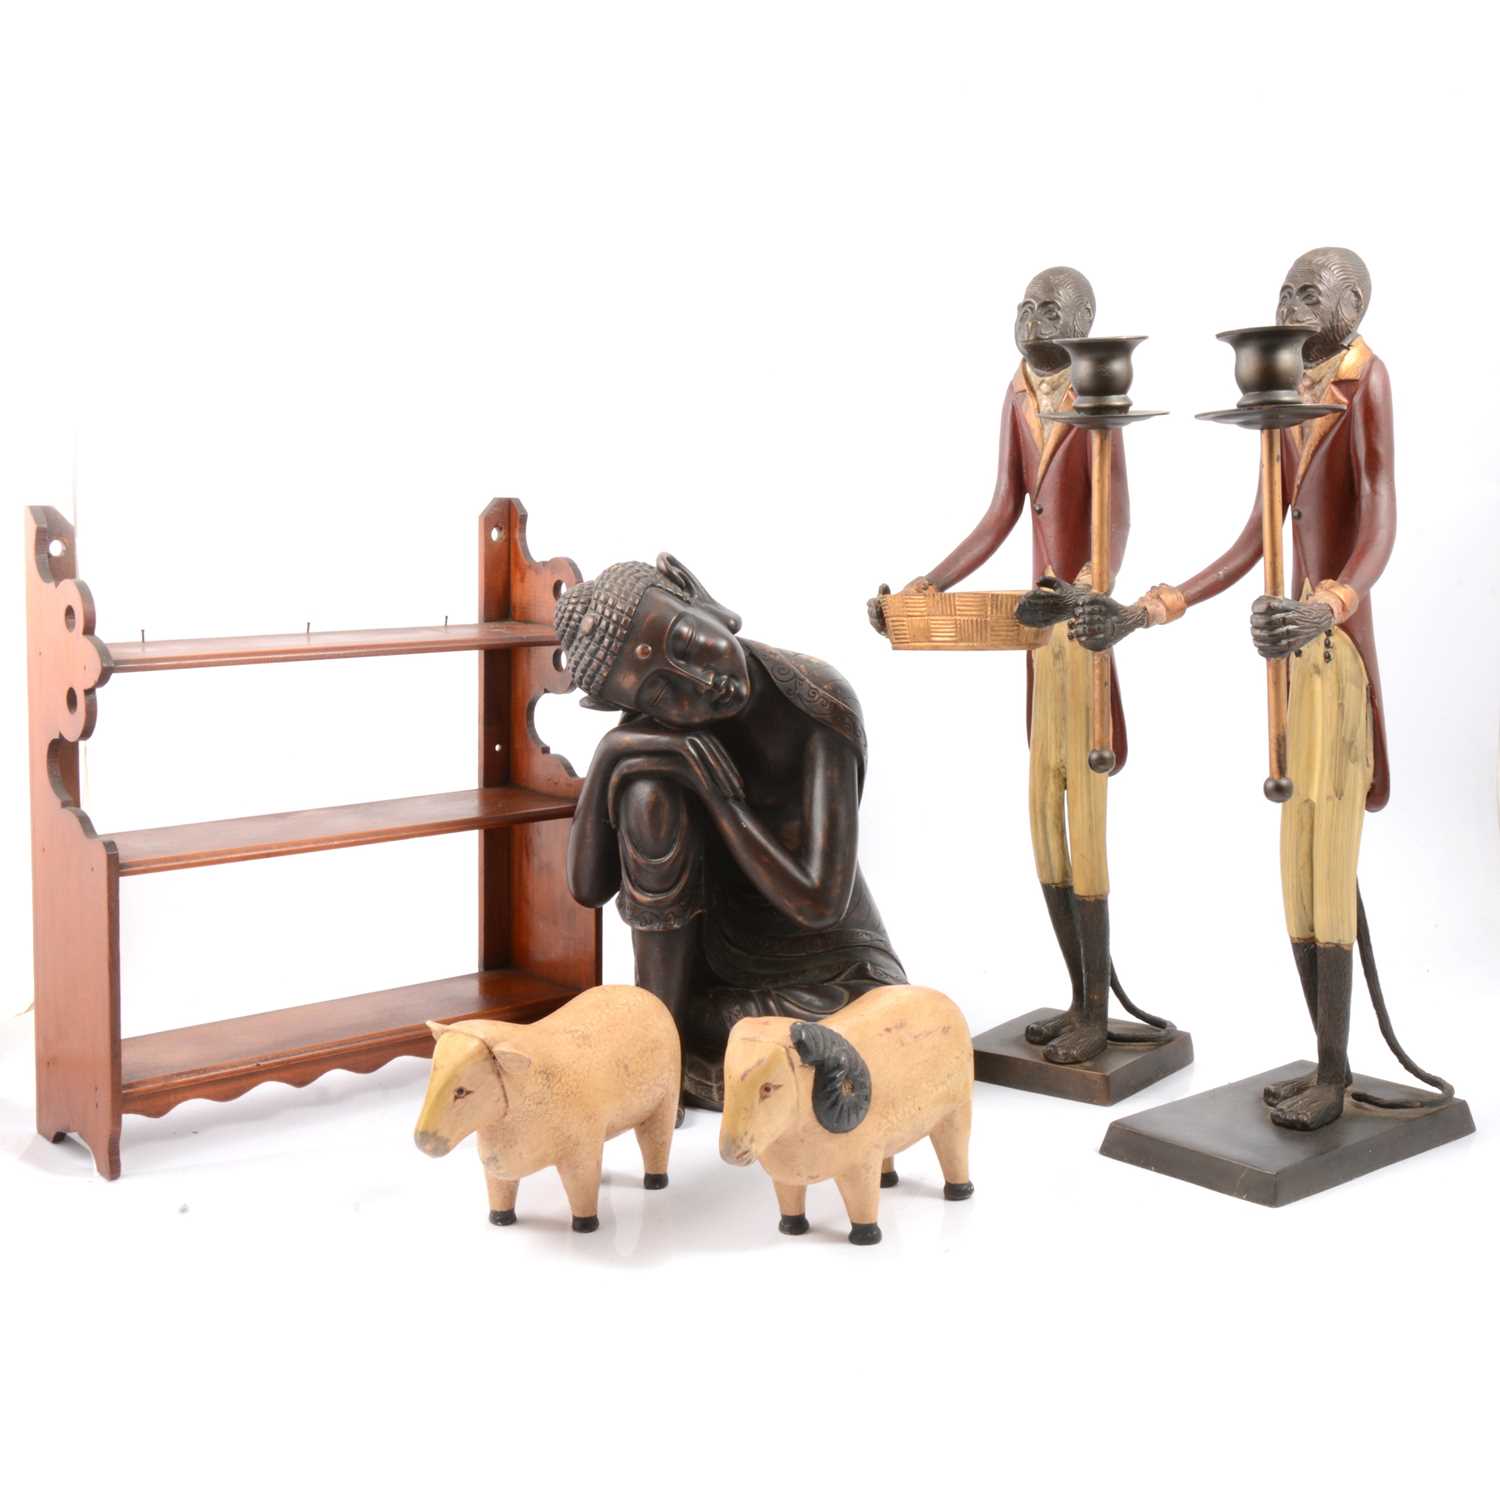 Lot 91 - Metal and wooden wares, to include monkey figures, spice rack etc.